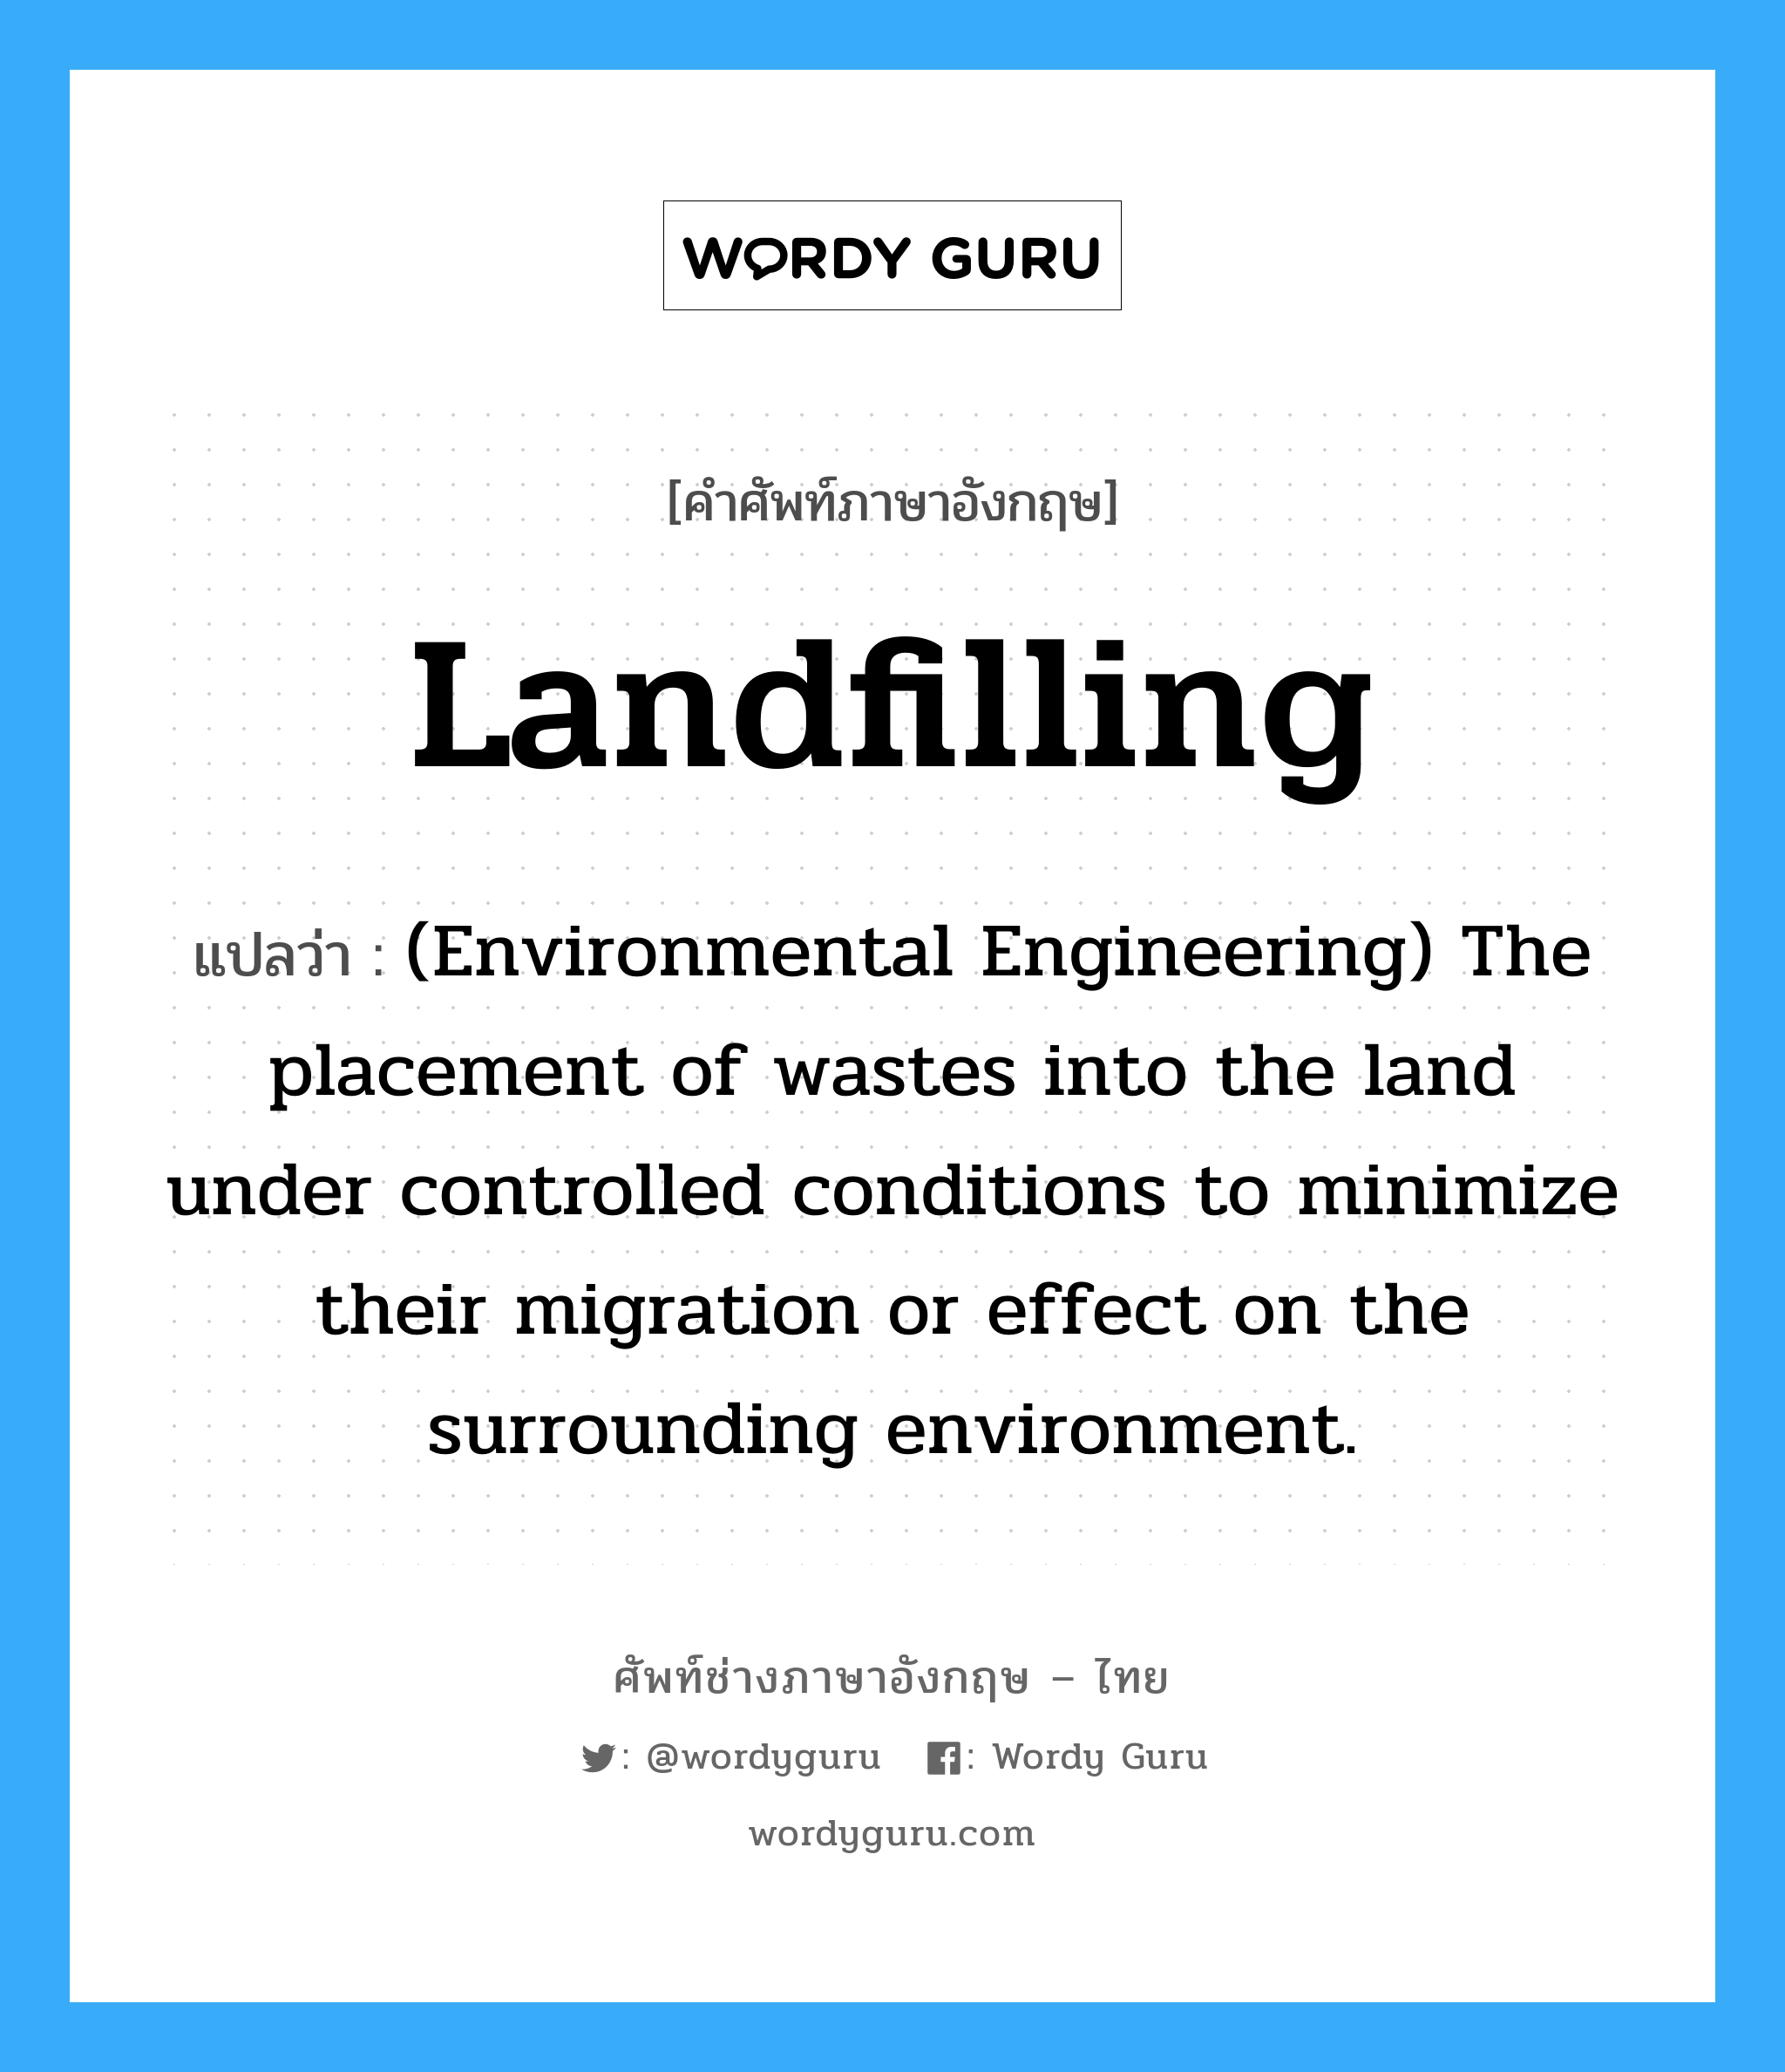 Landfilling แปลว่า?, คำศัพท์ช่างภาษาอังกฤษ - ไทย Landfilling คำศัพท์ภาษาอังกฤษ Landfilling แปลว่า (Environmental Engineering) The placement of wastes into the land under controlled conditions to minimize their migration or effect on the surrounding environment.